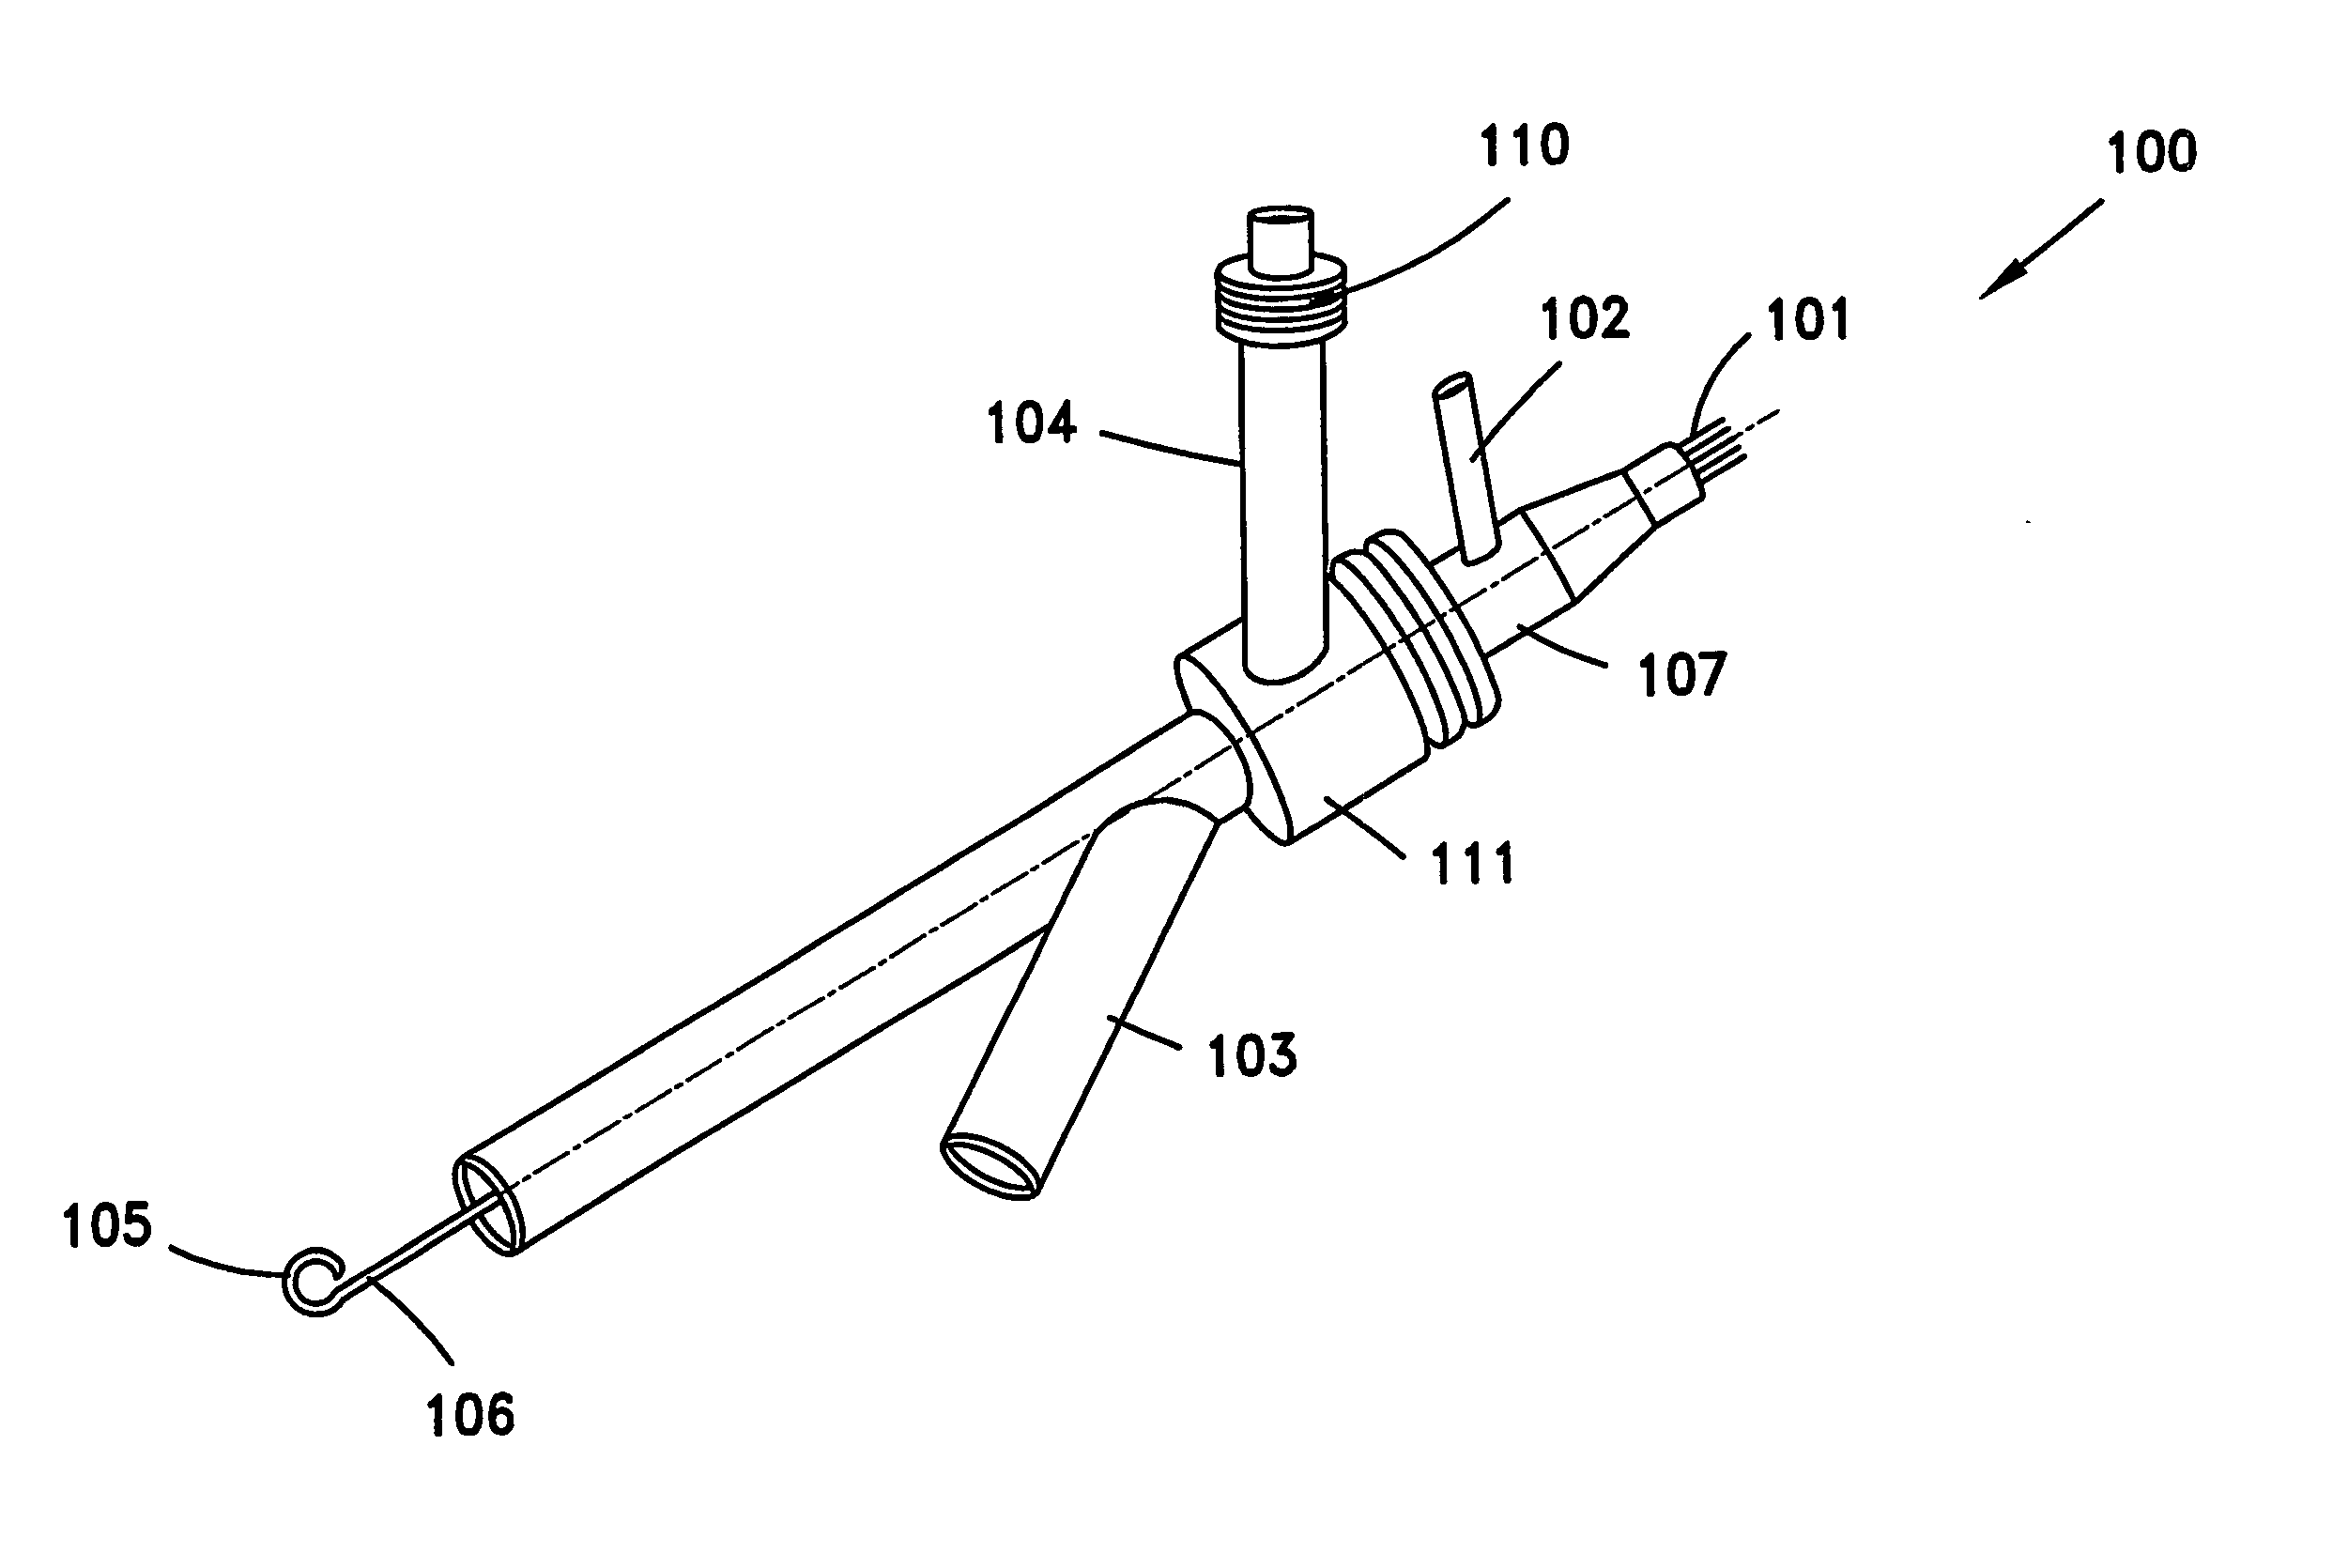 Apparatus and method for removing pigments from a pigmented section of skin